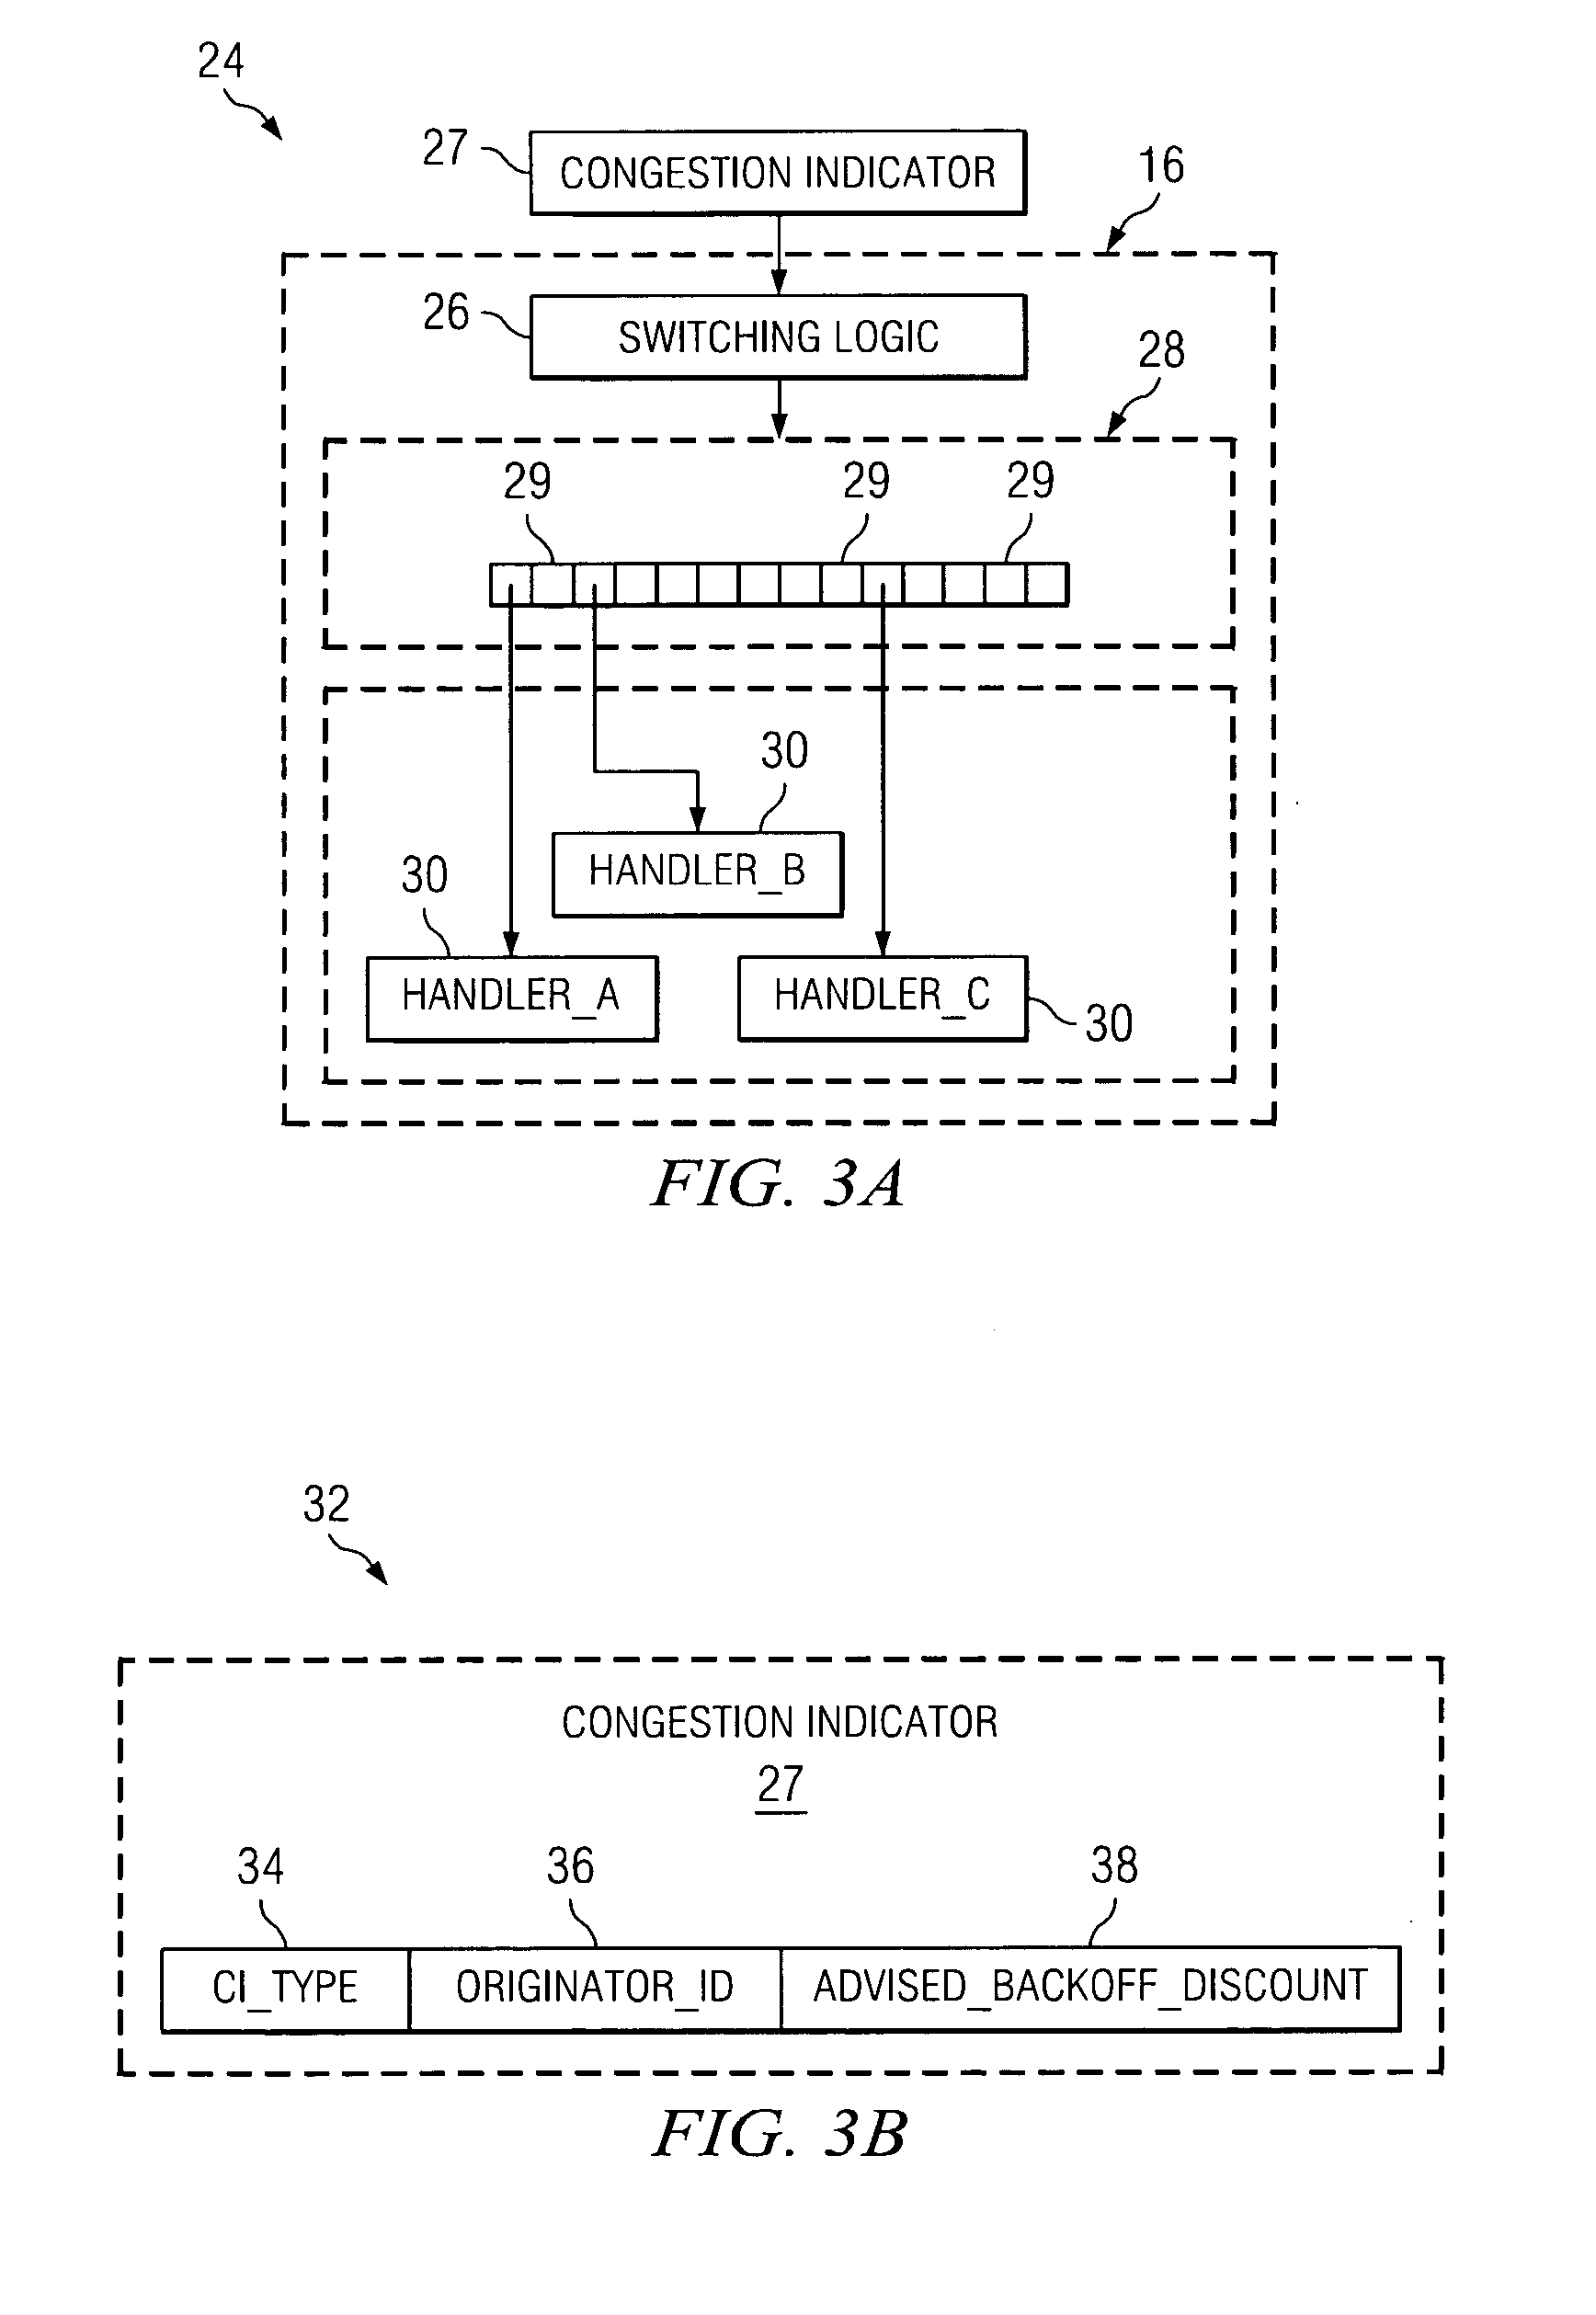 Method to regulate traffic congestion in a network